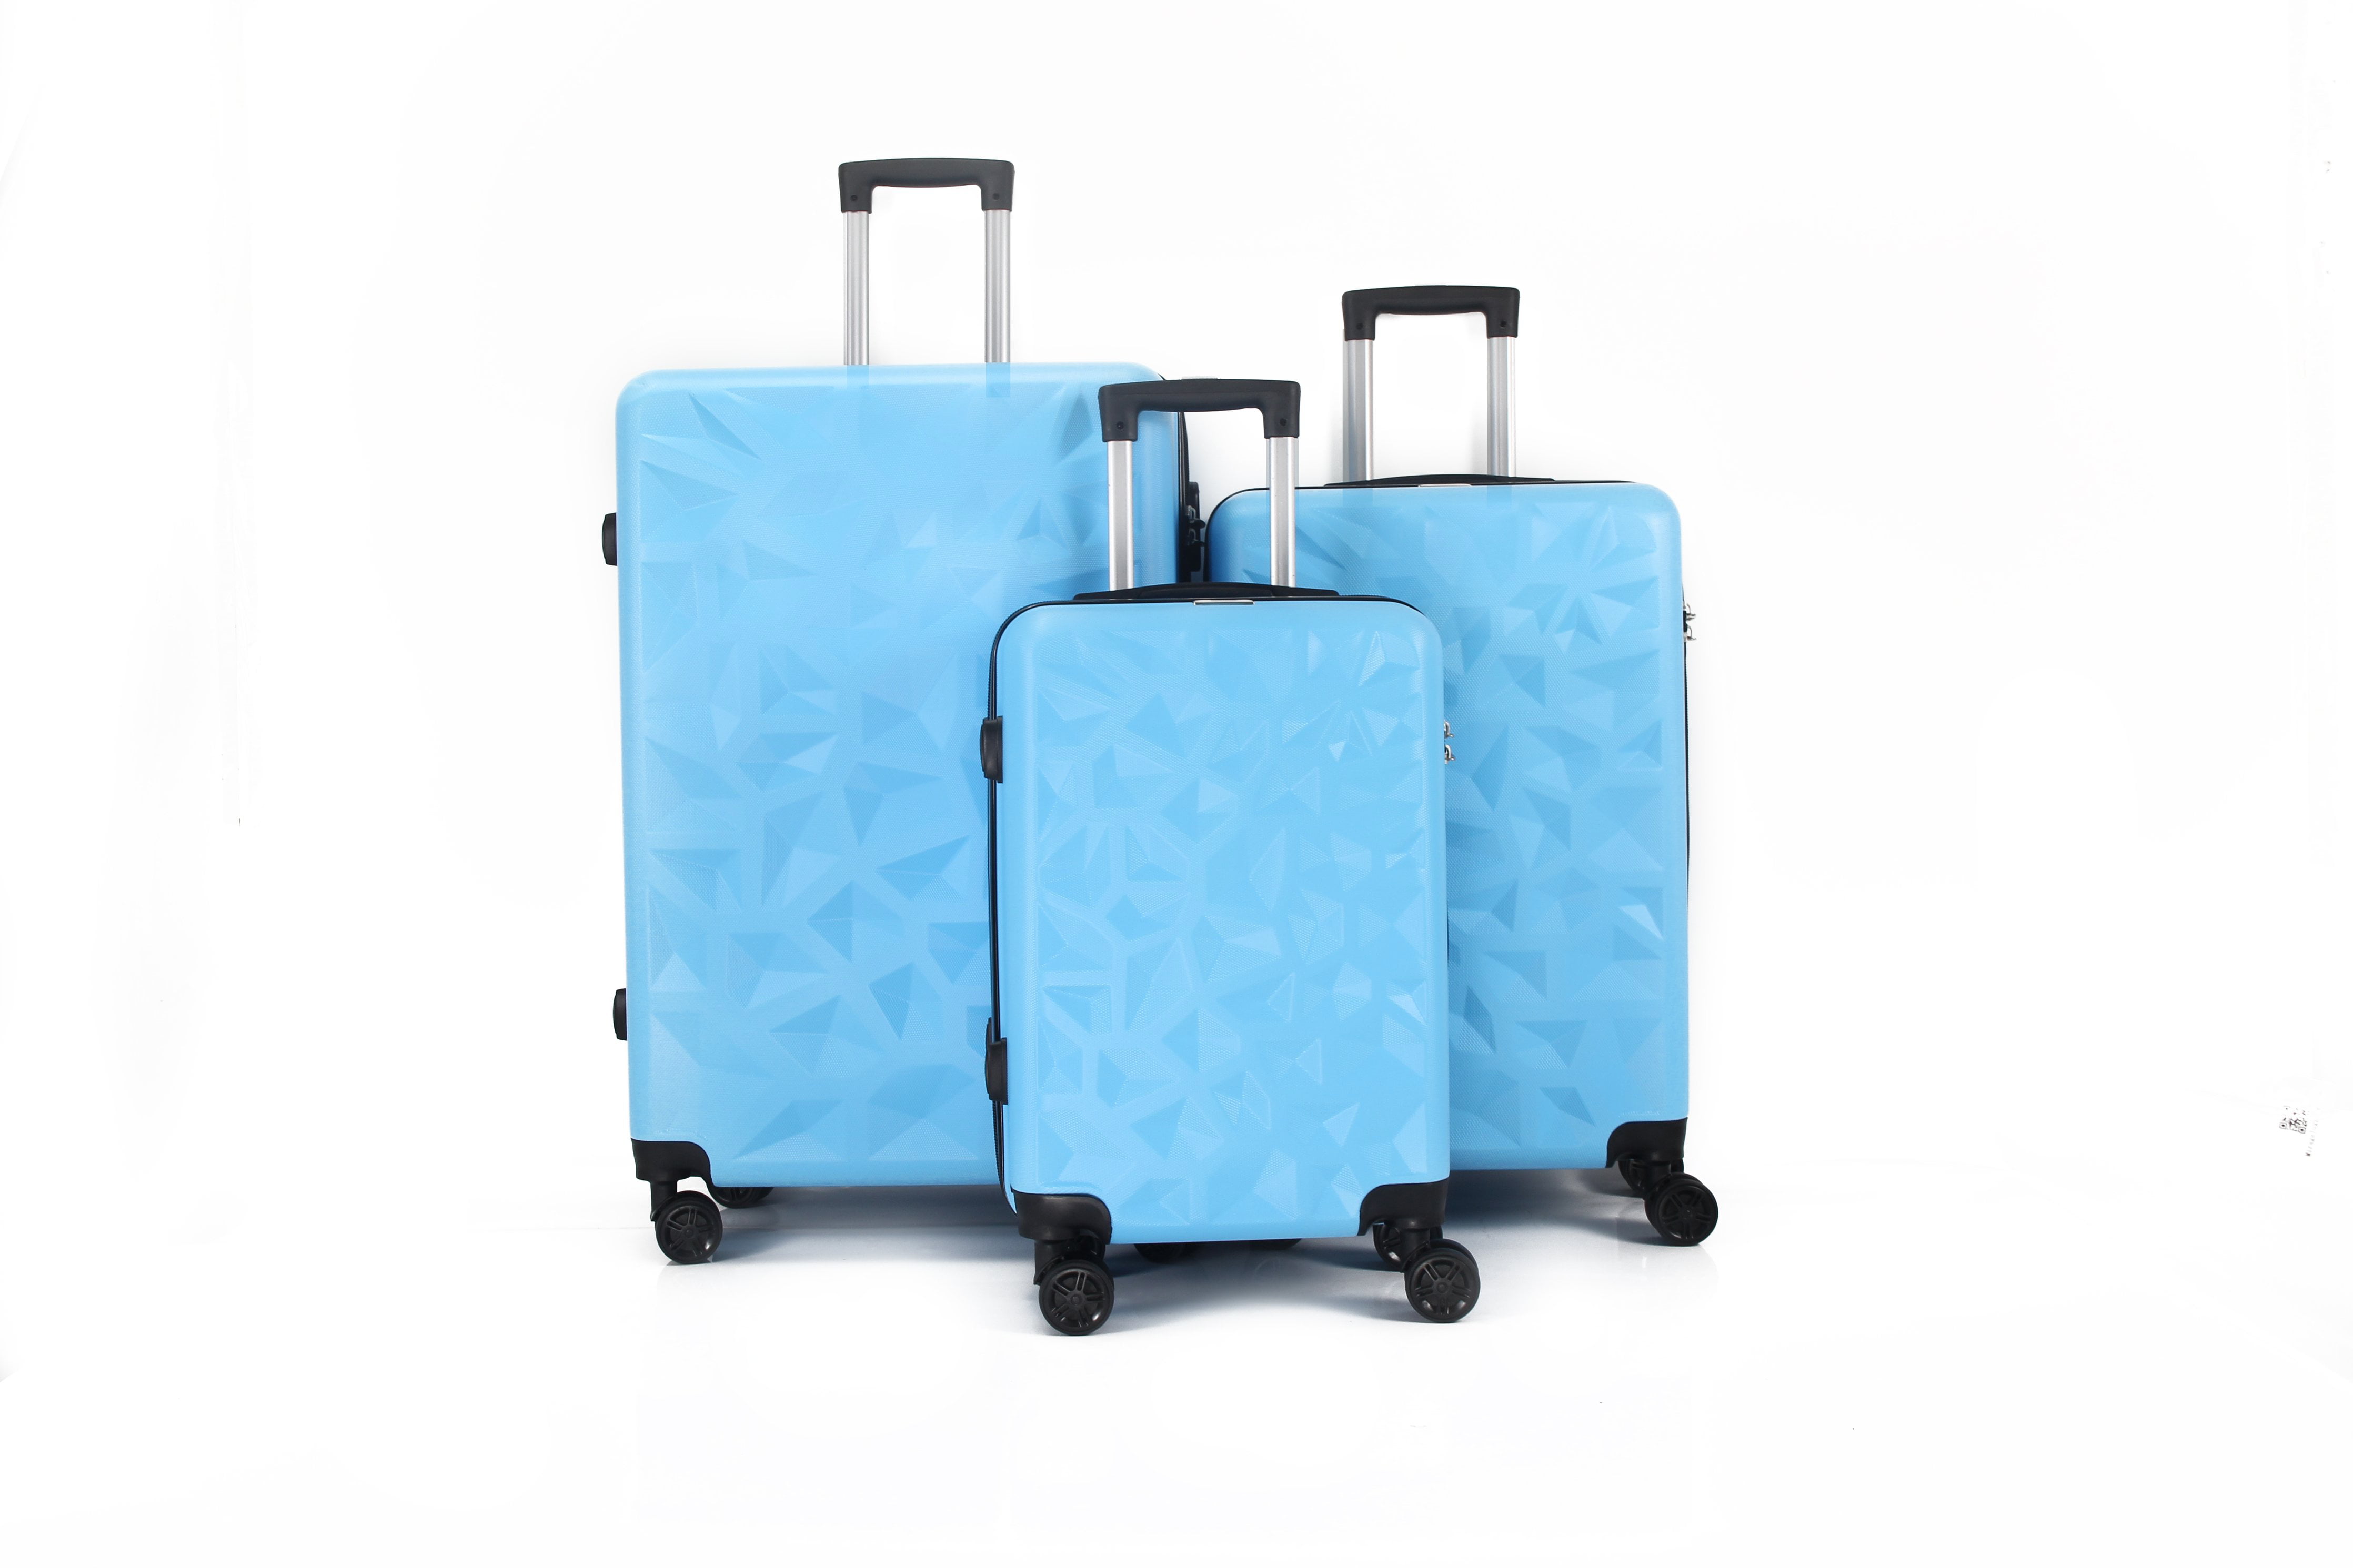 Mirage DARCY ABS Hard shell Lightweight 360 Dual Spinning Wheels Combo Lock 28 24 20 3 Piece Luggage Set 